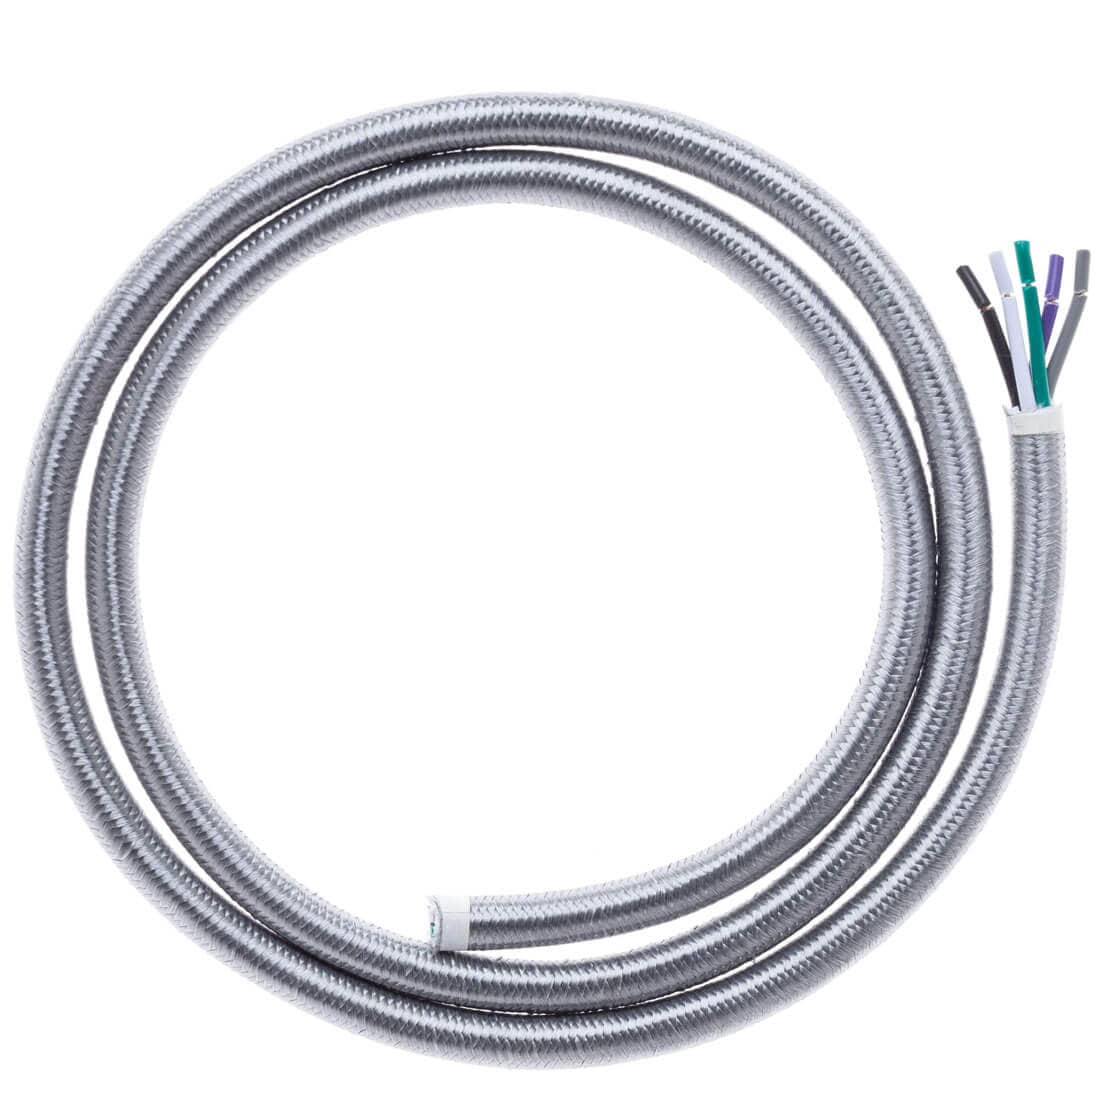 SJT-5 18g Fabric Wire